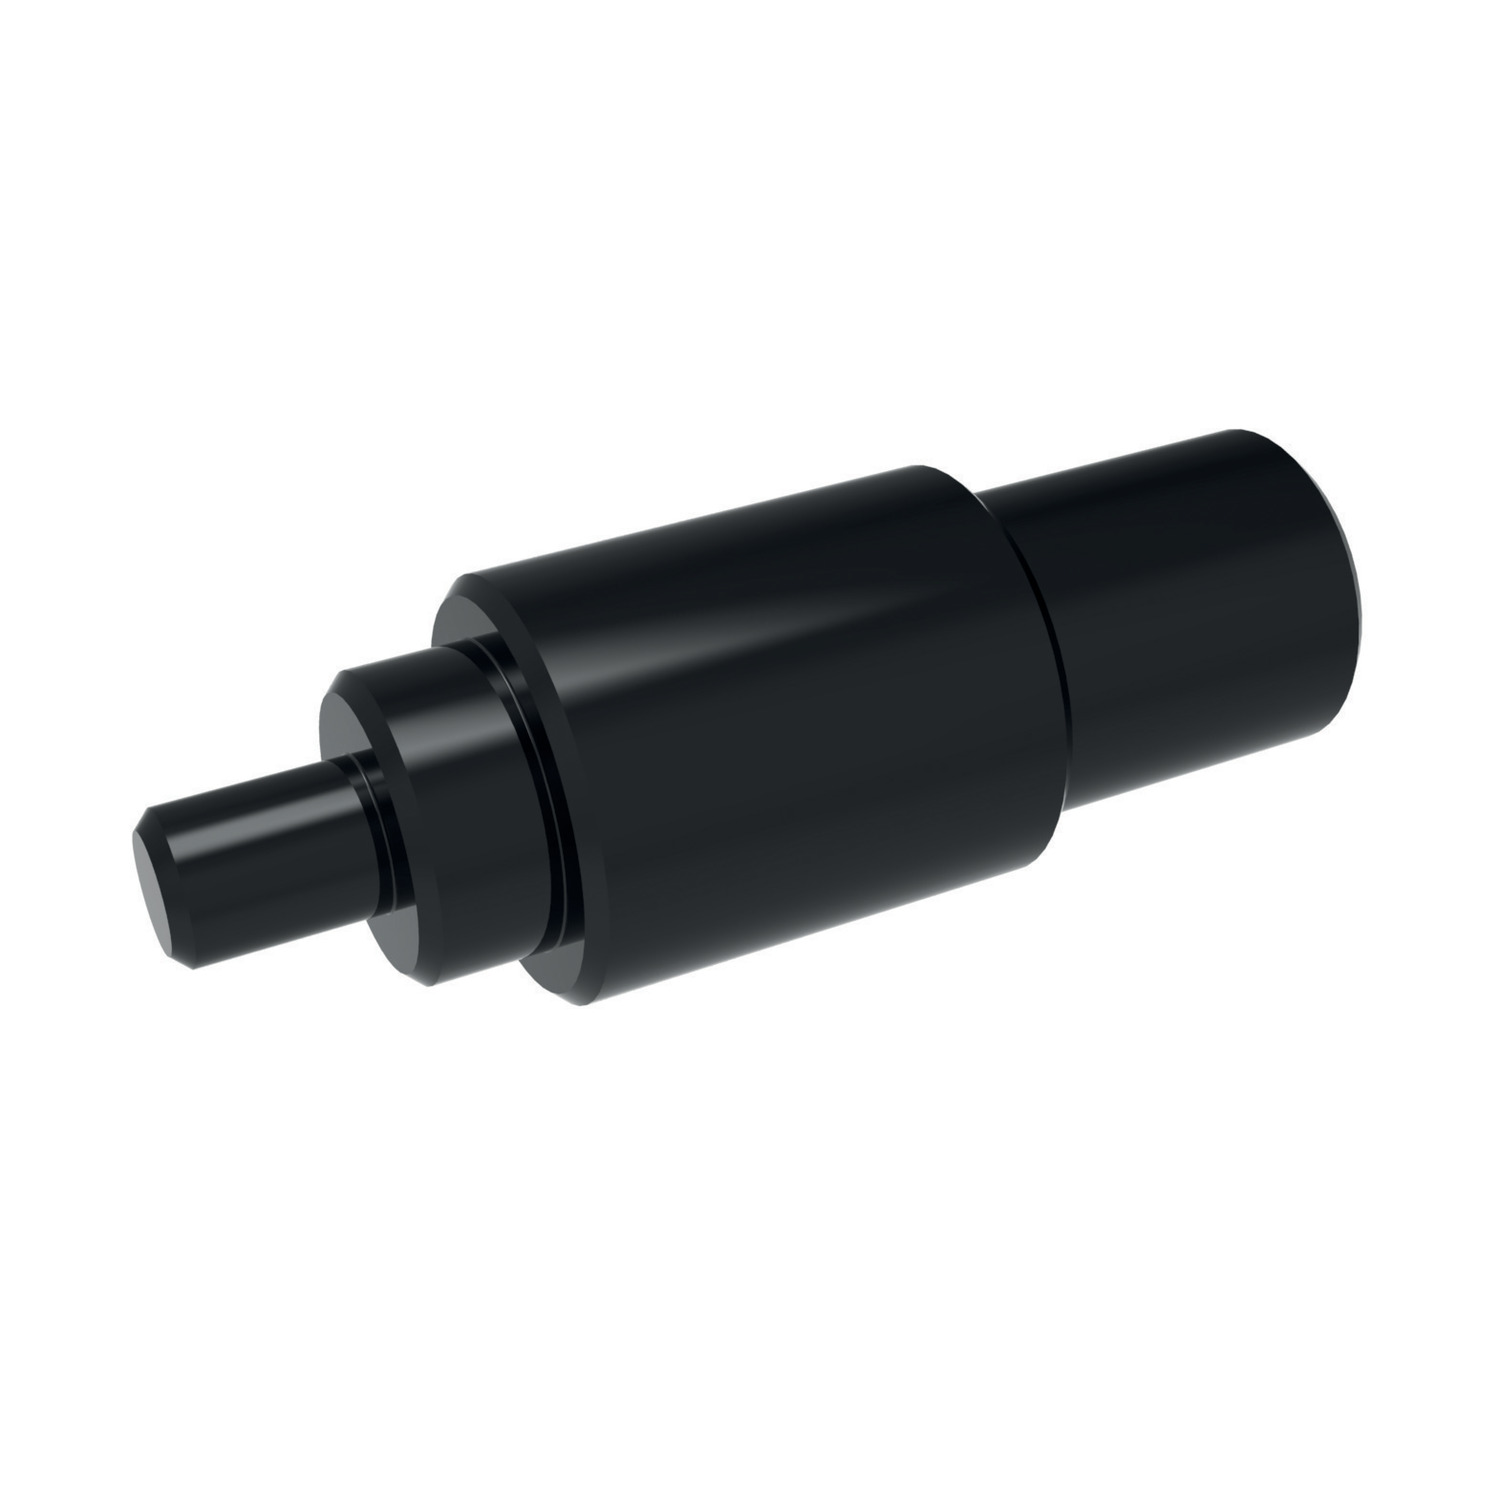 Product P0088.2, Installation Tool - Metric - Heavy Duty for threaded inserts P0083.1 & P0083.2 / 